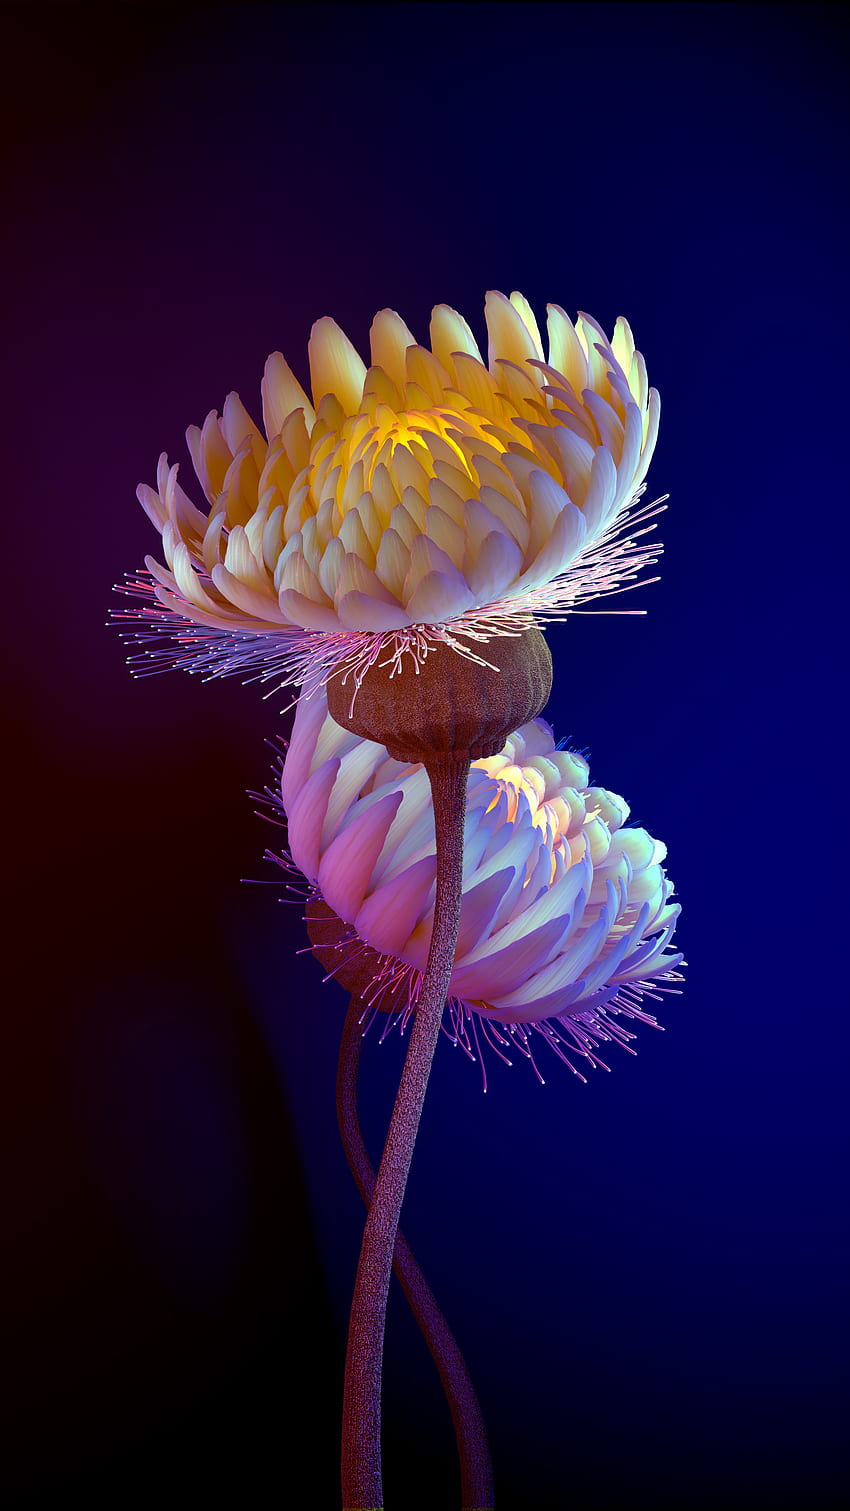 1920x1080px, 1080P Free download | Flowers, electric blue, cnidaria HD ...